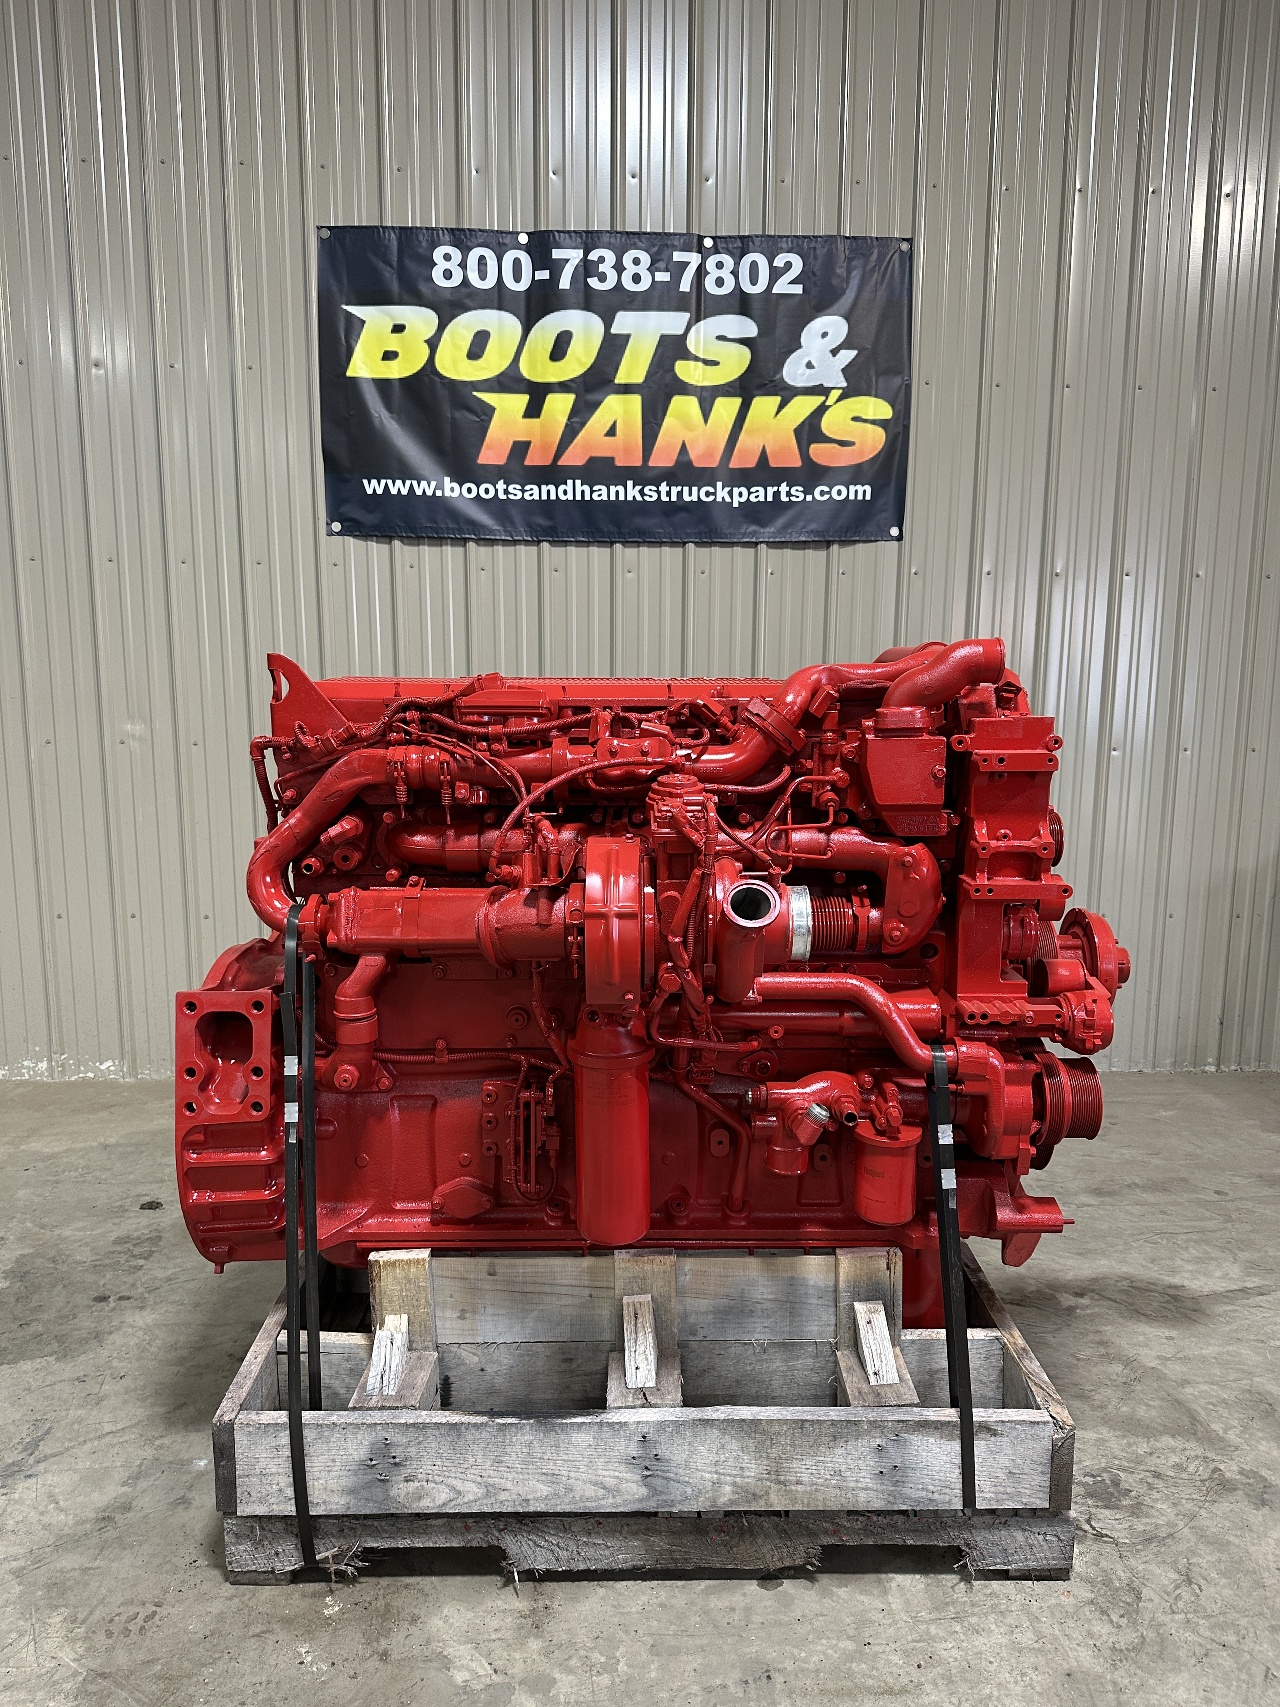 USED 2014 CUMMINS ISX15 COMPLETE ENGINE TRUCK PARTS #2008